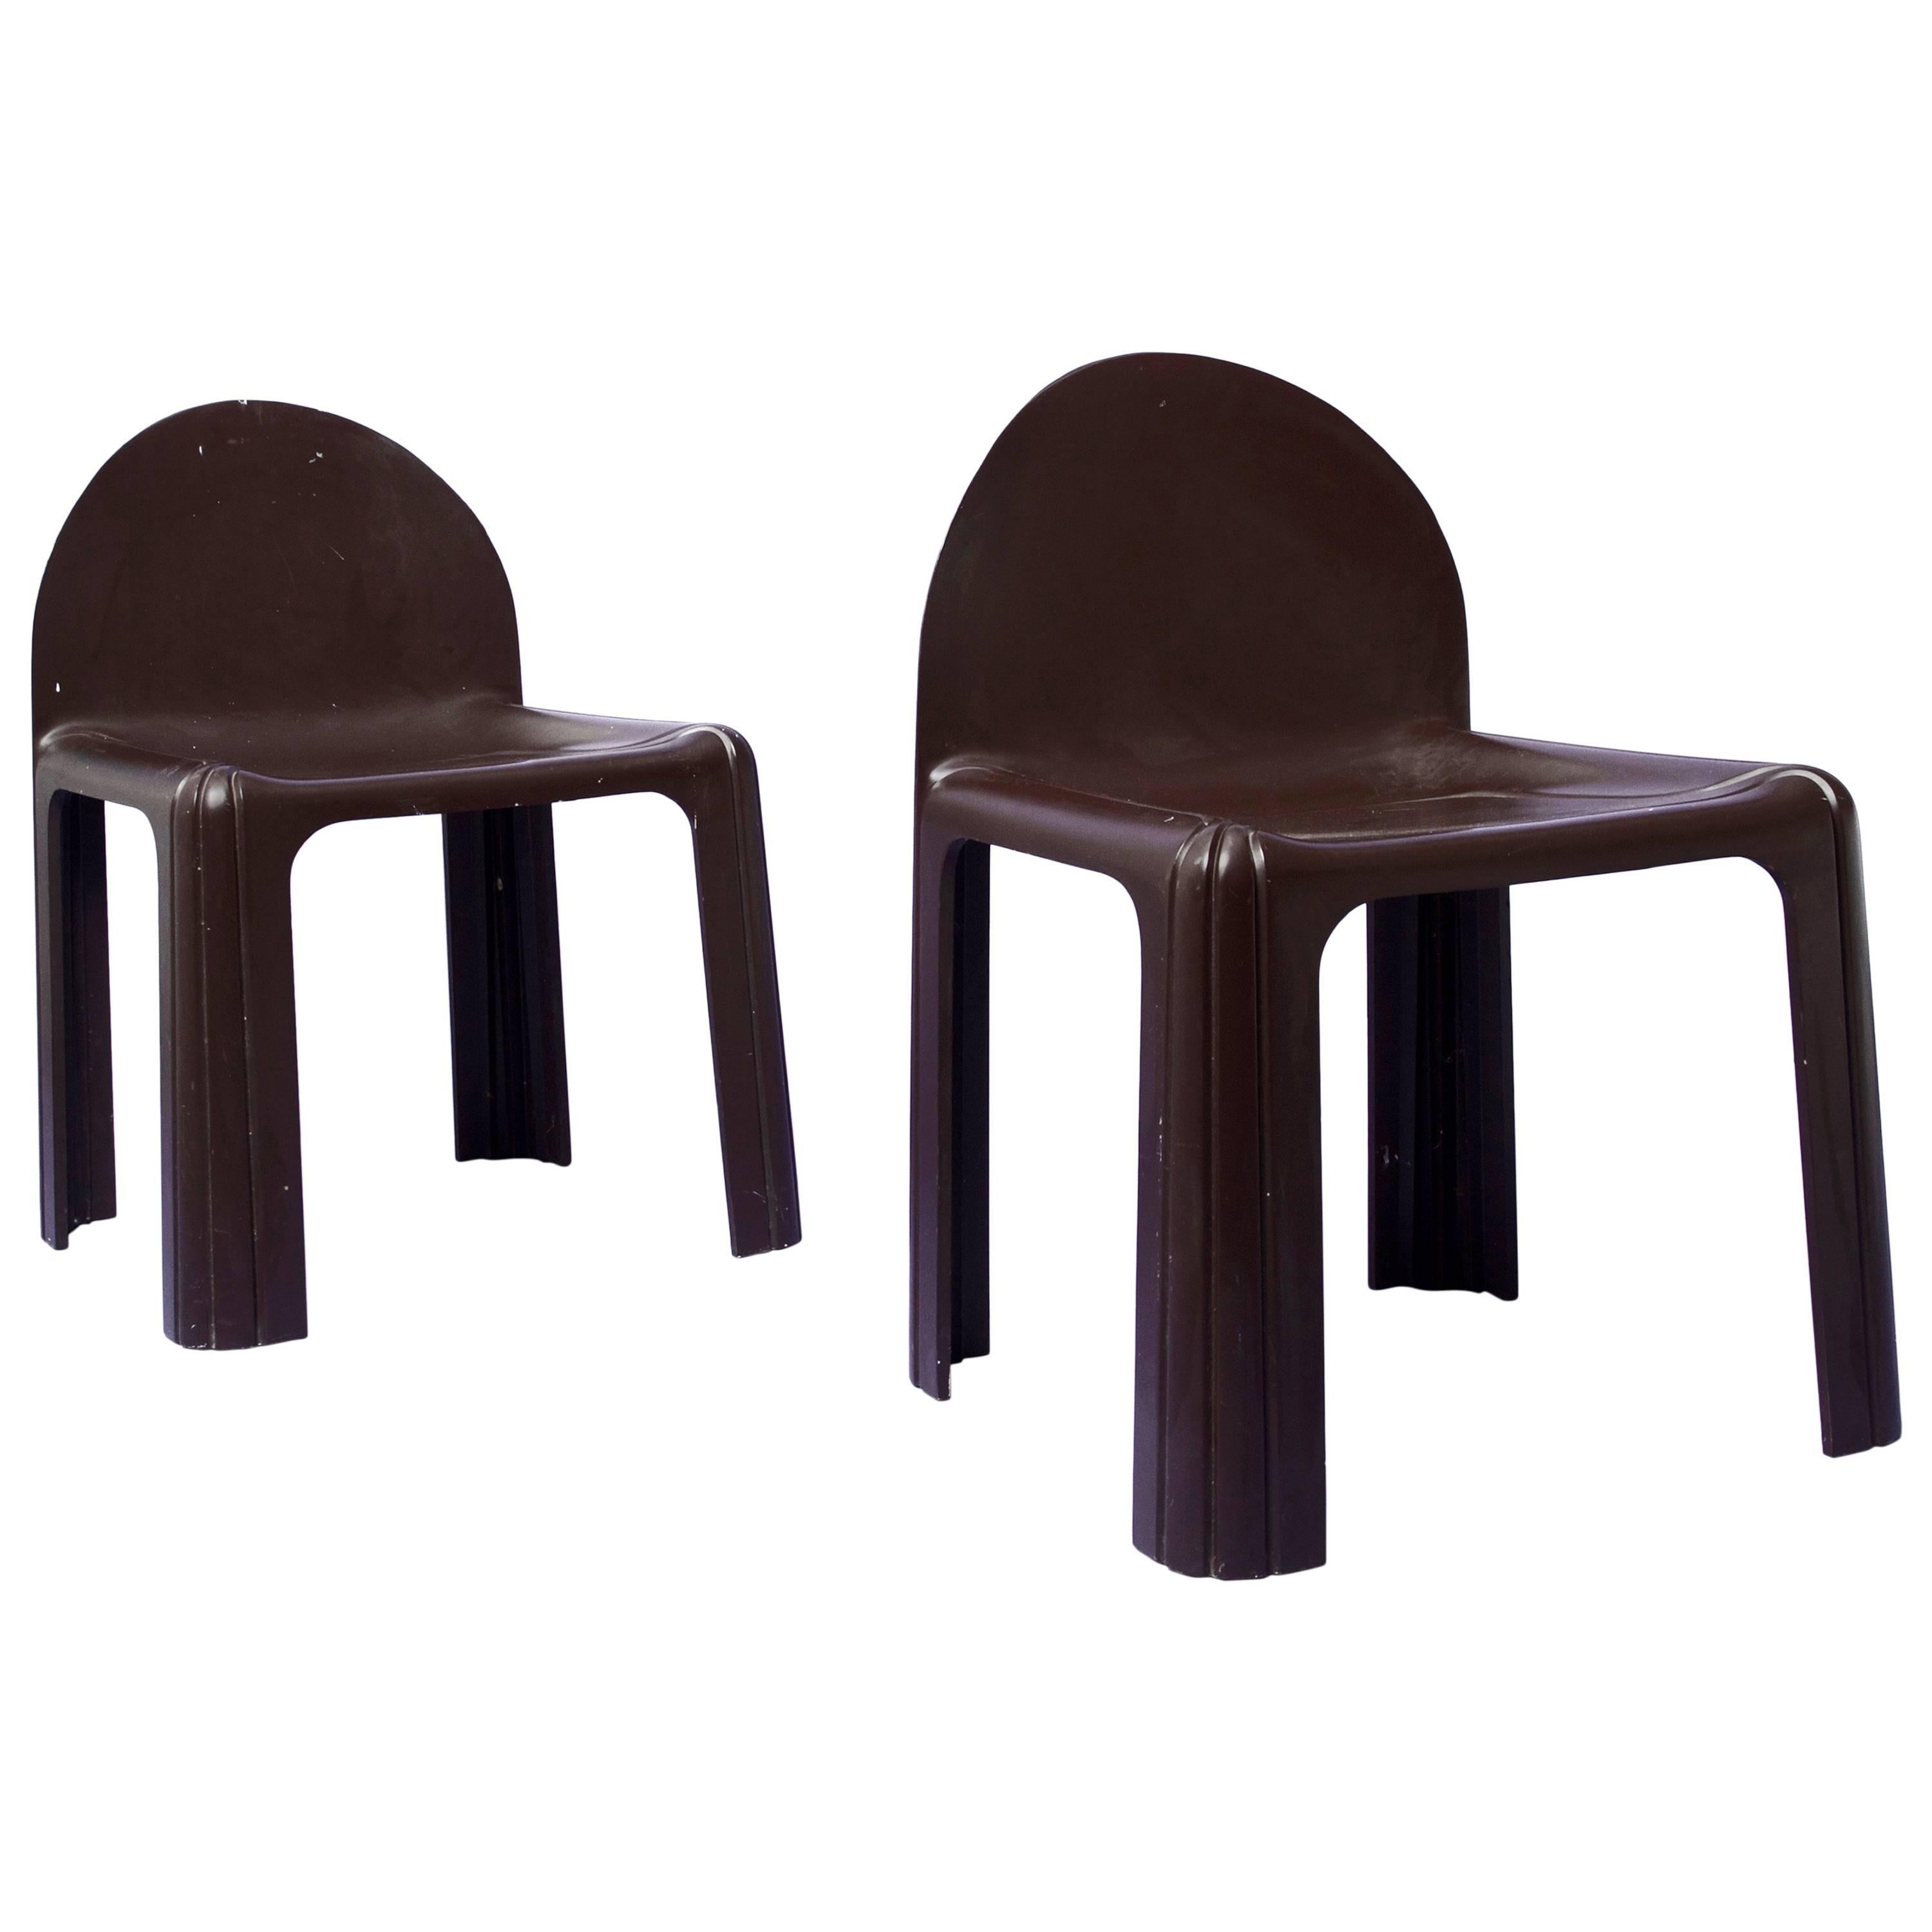 1968, Gae Aulenti, Kartell, Pair of "4854" Brown Chairs For Sale